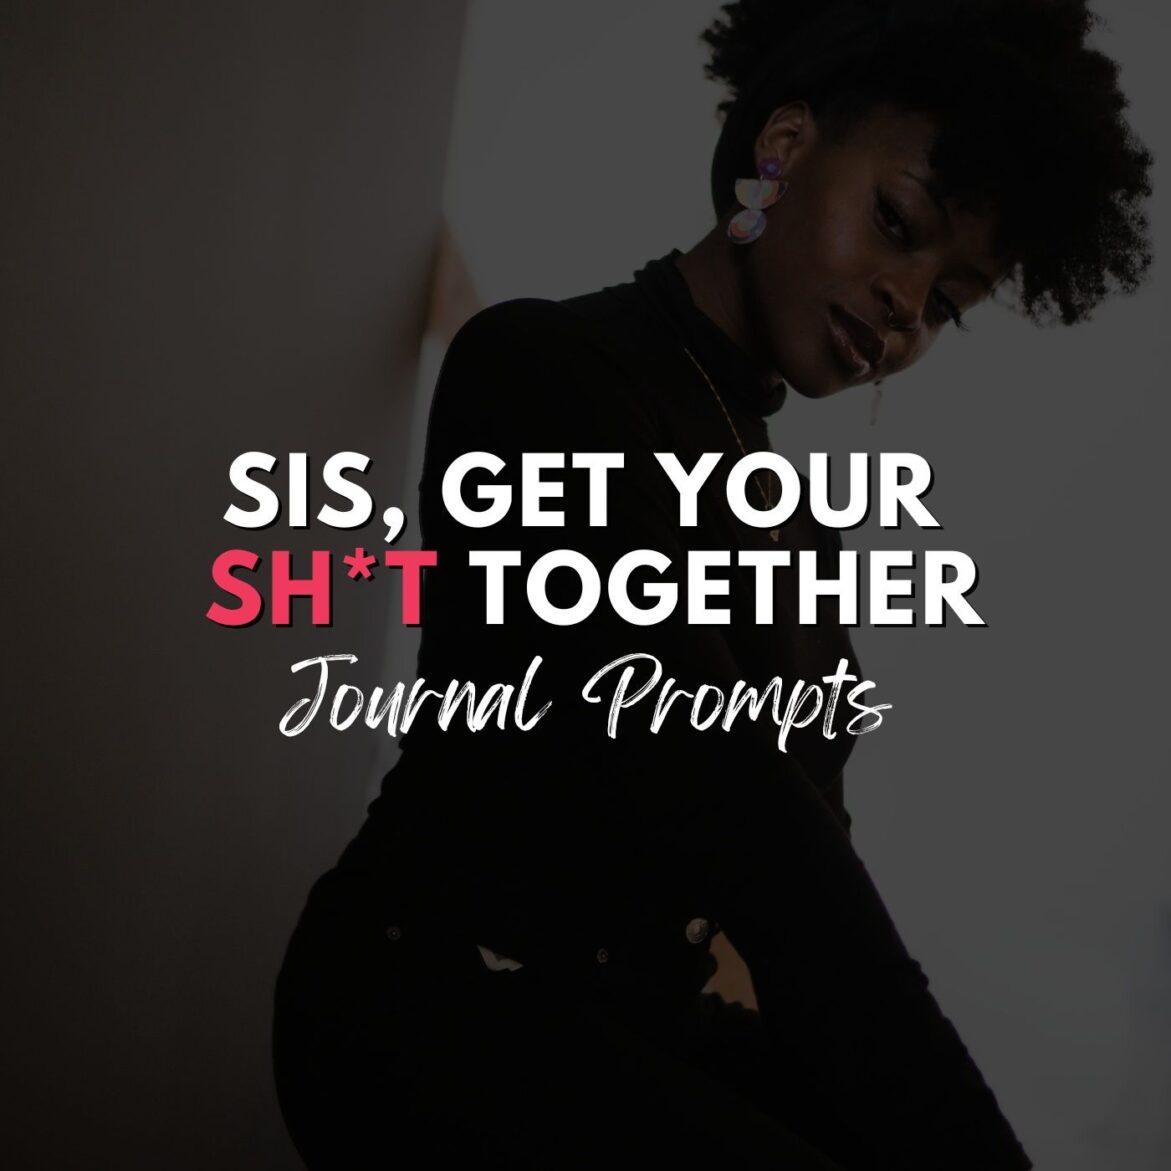 Black Podcasting - Sis, Get Your Sh*t Together - Journal Prompts